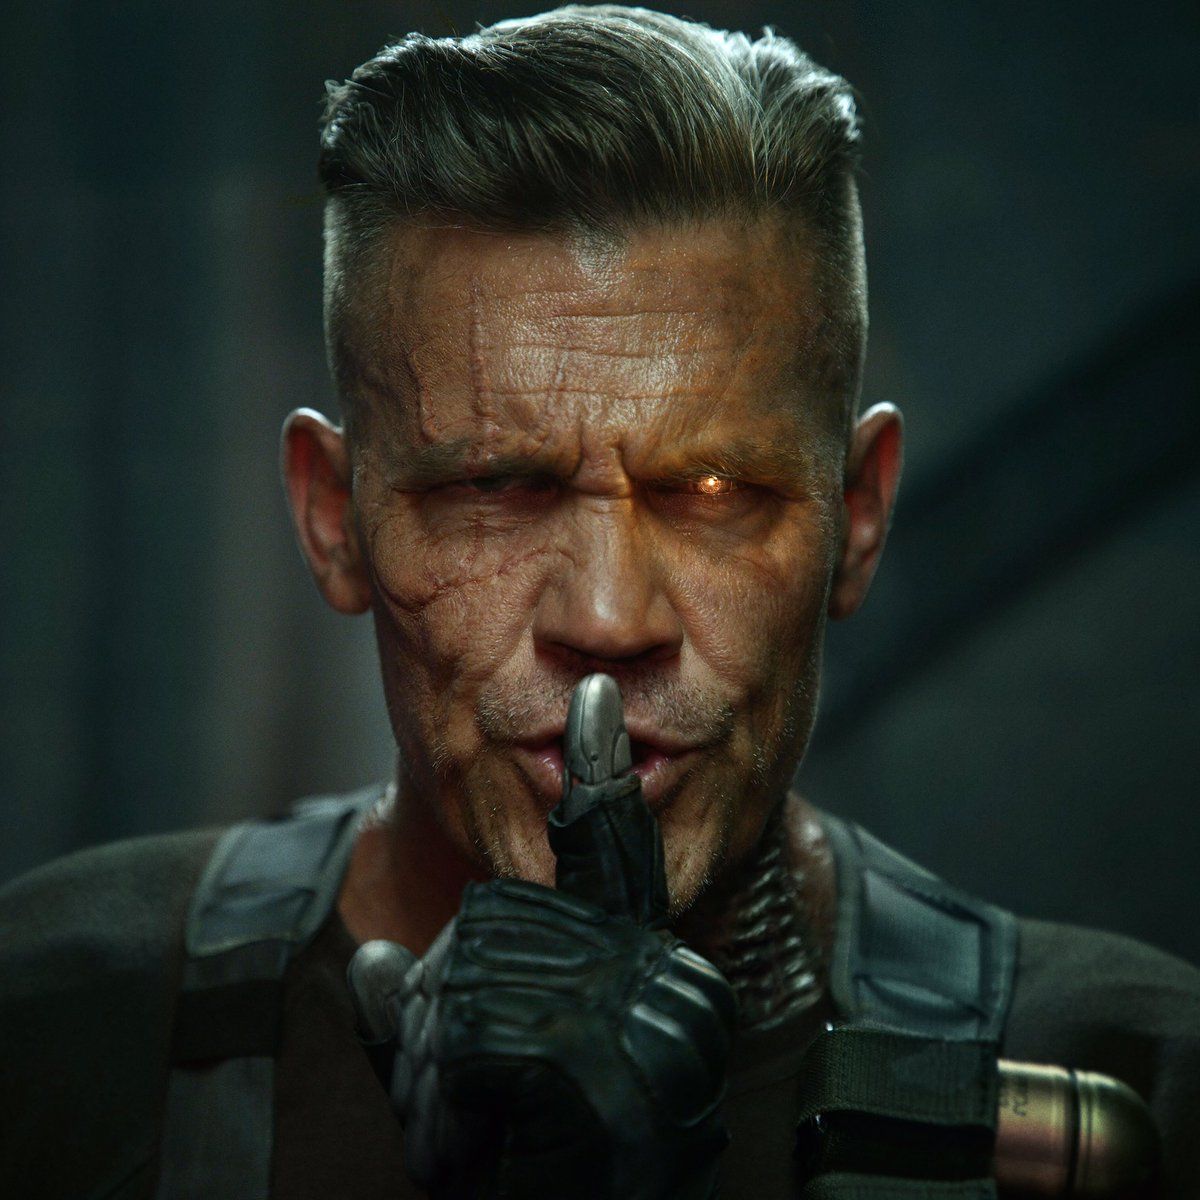 Take A Look At Josh Brolin’s Cable